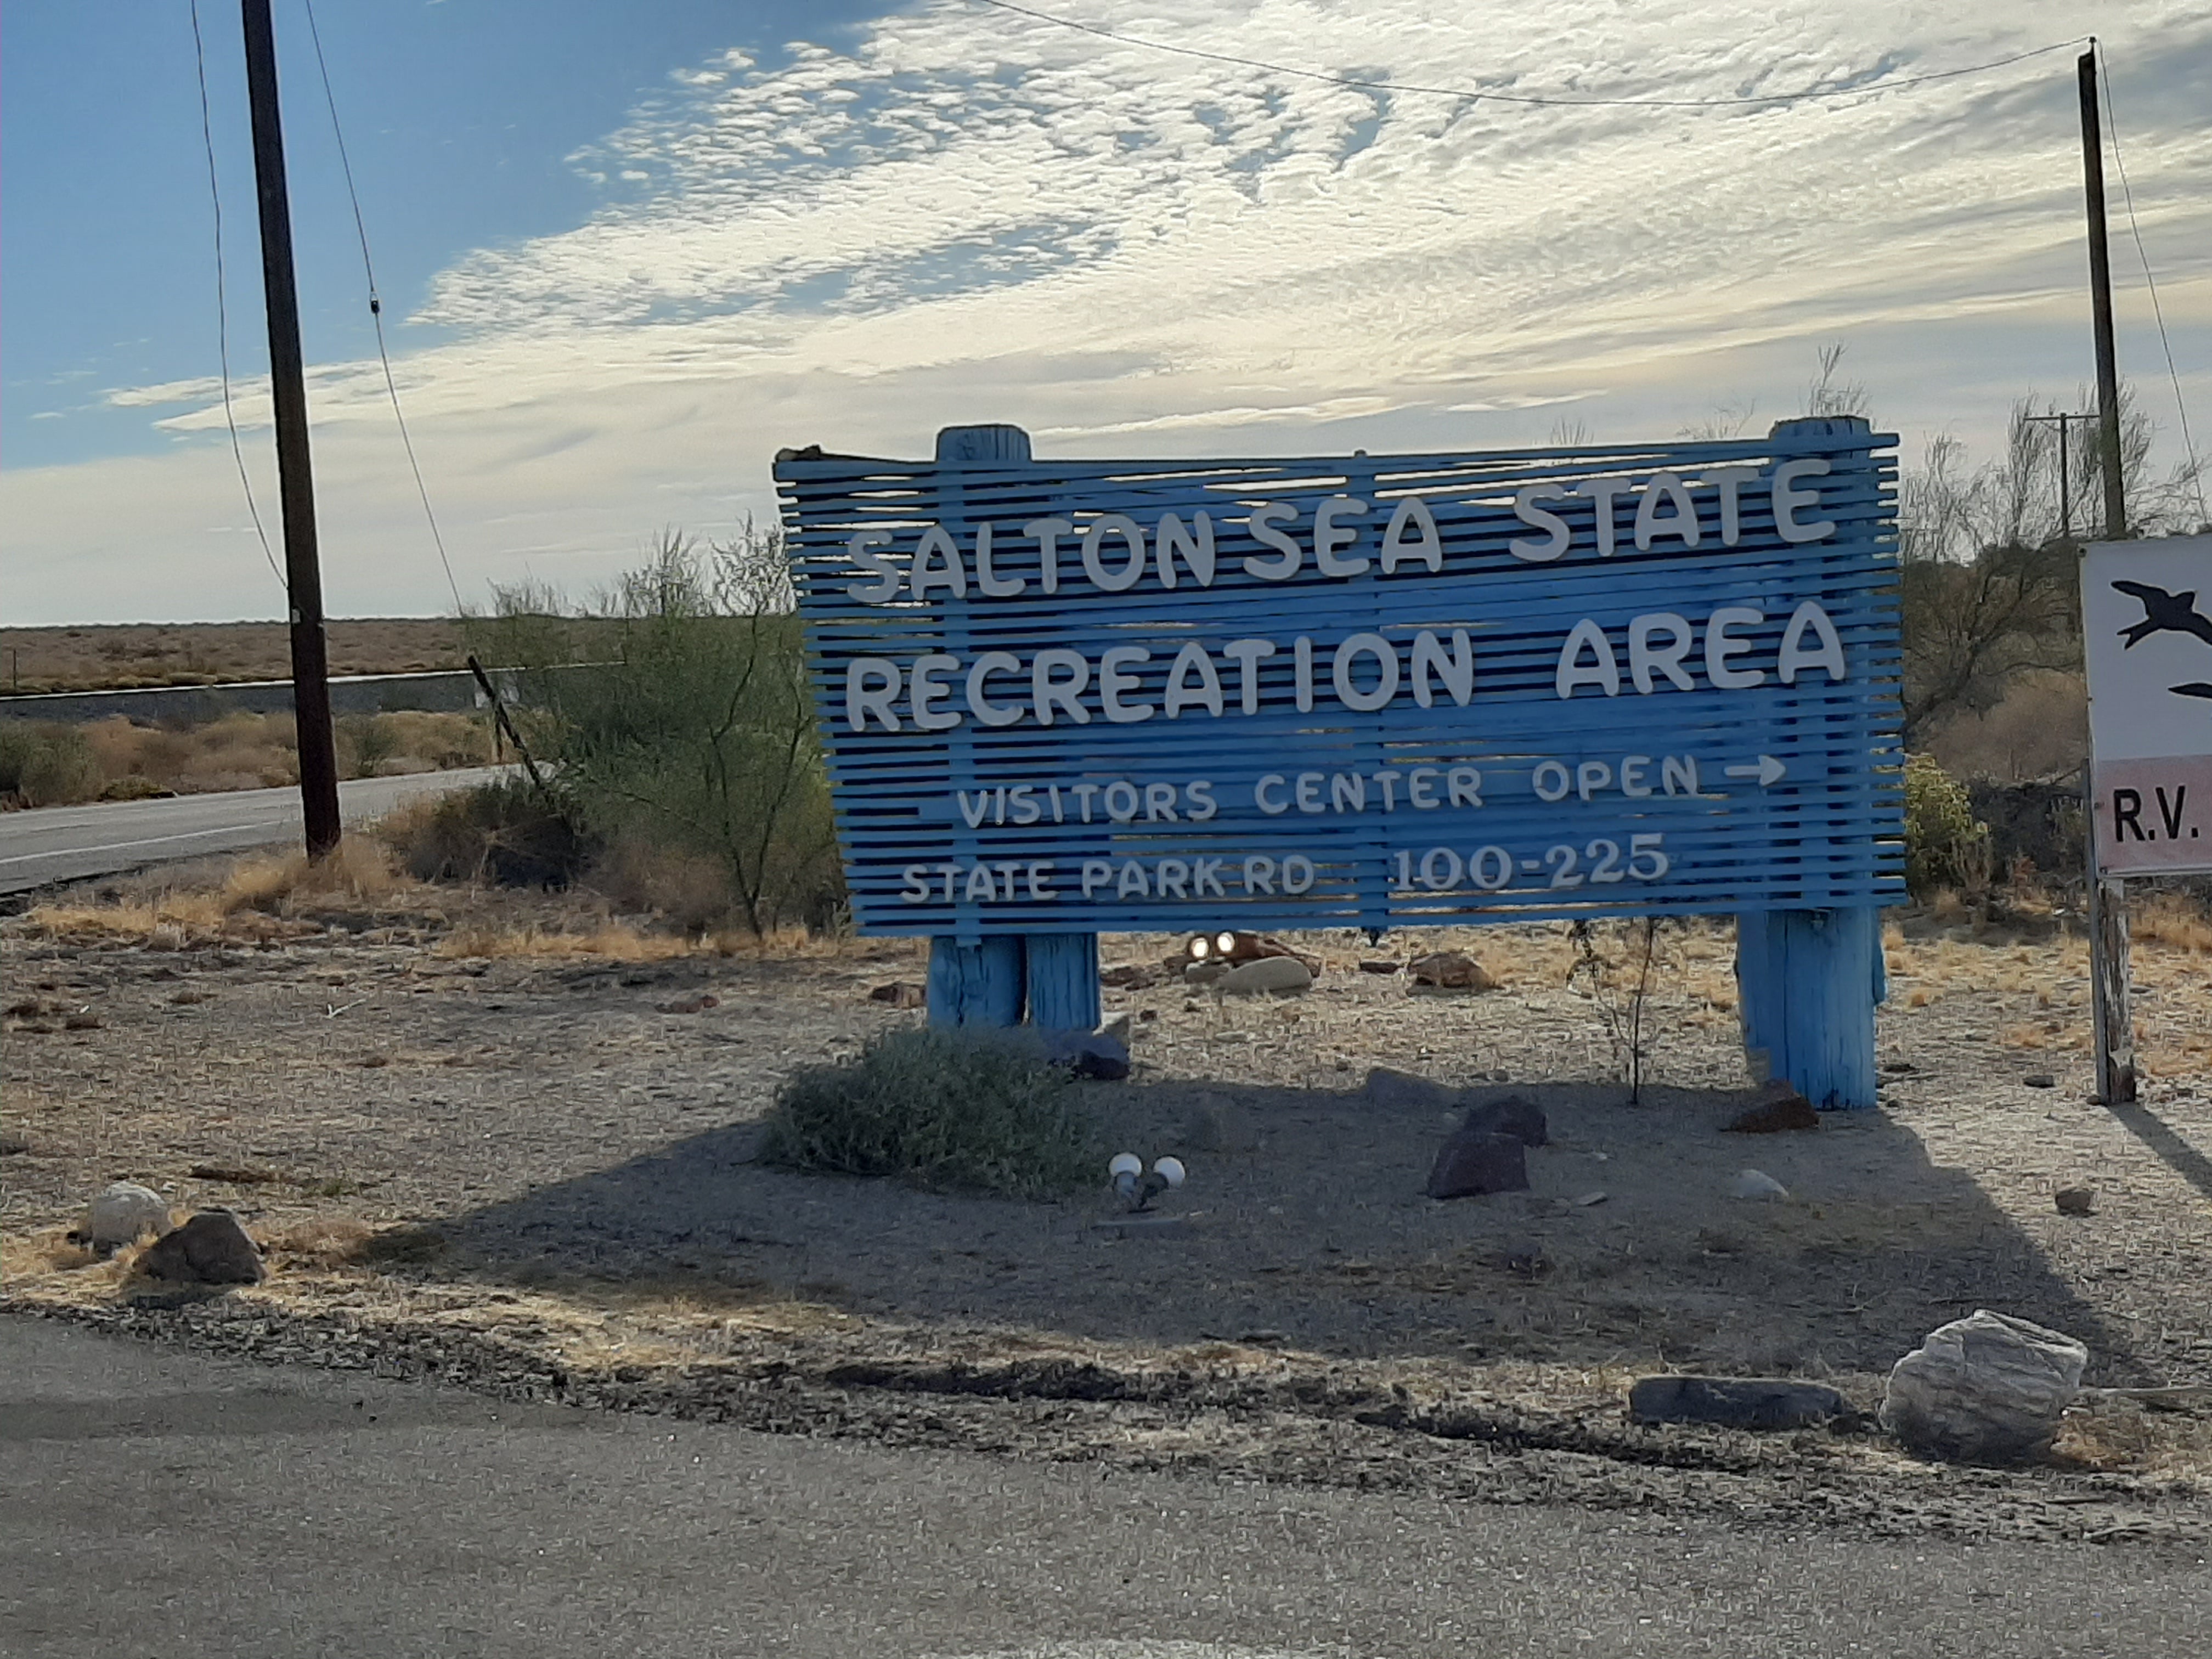 Camper submitted image from Salton Sea Sra - 3